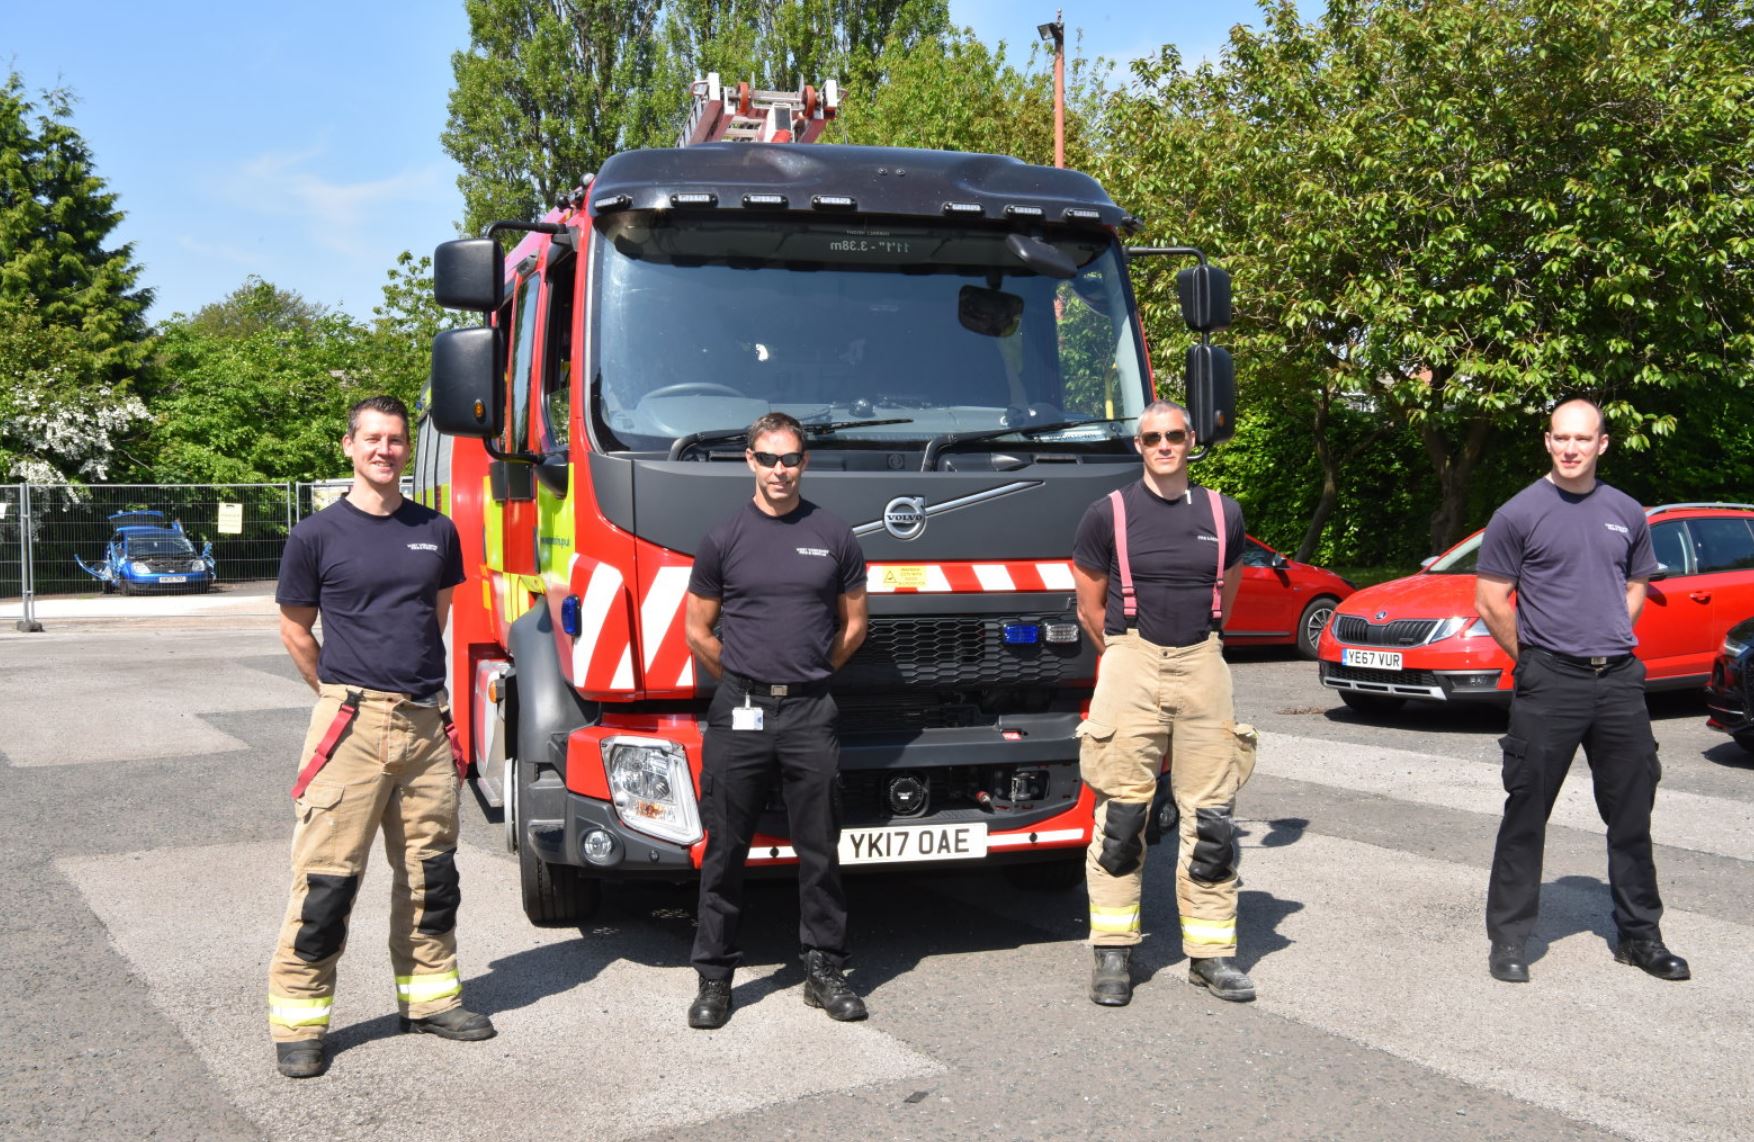 Firefighters stood in front of a Fire engine in car park. 